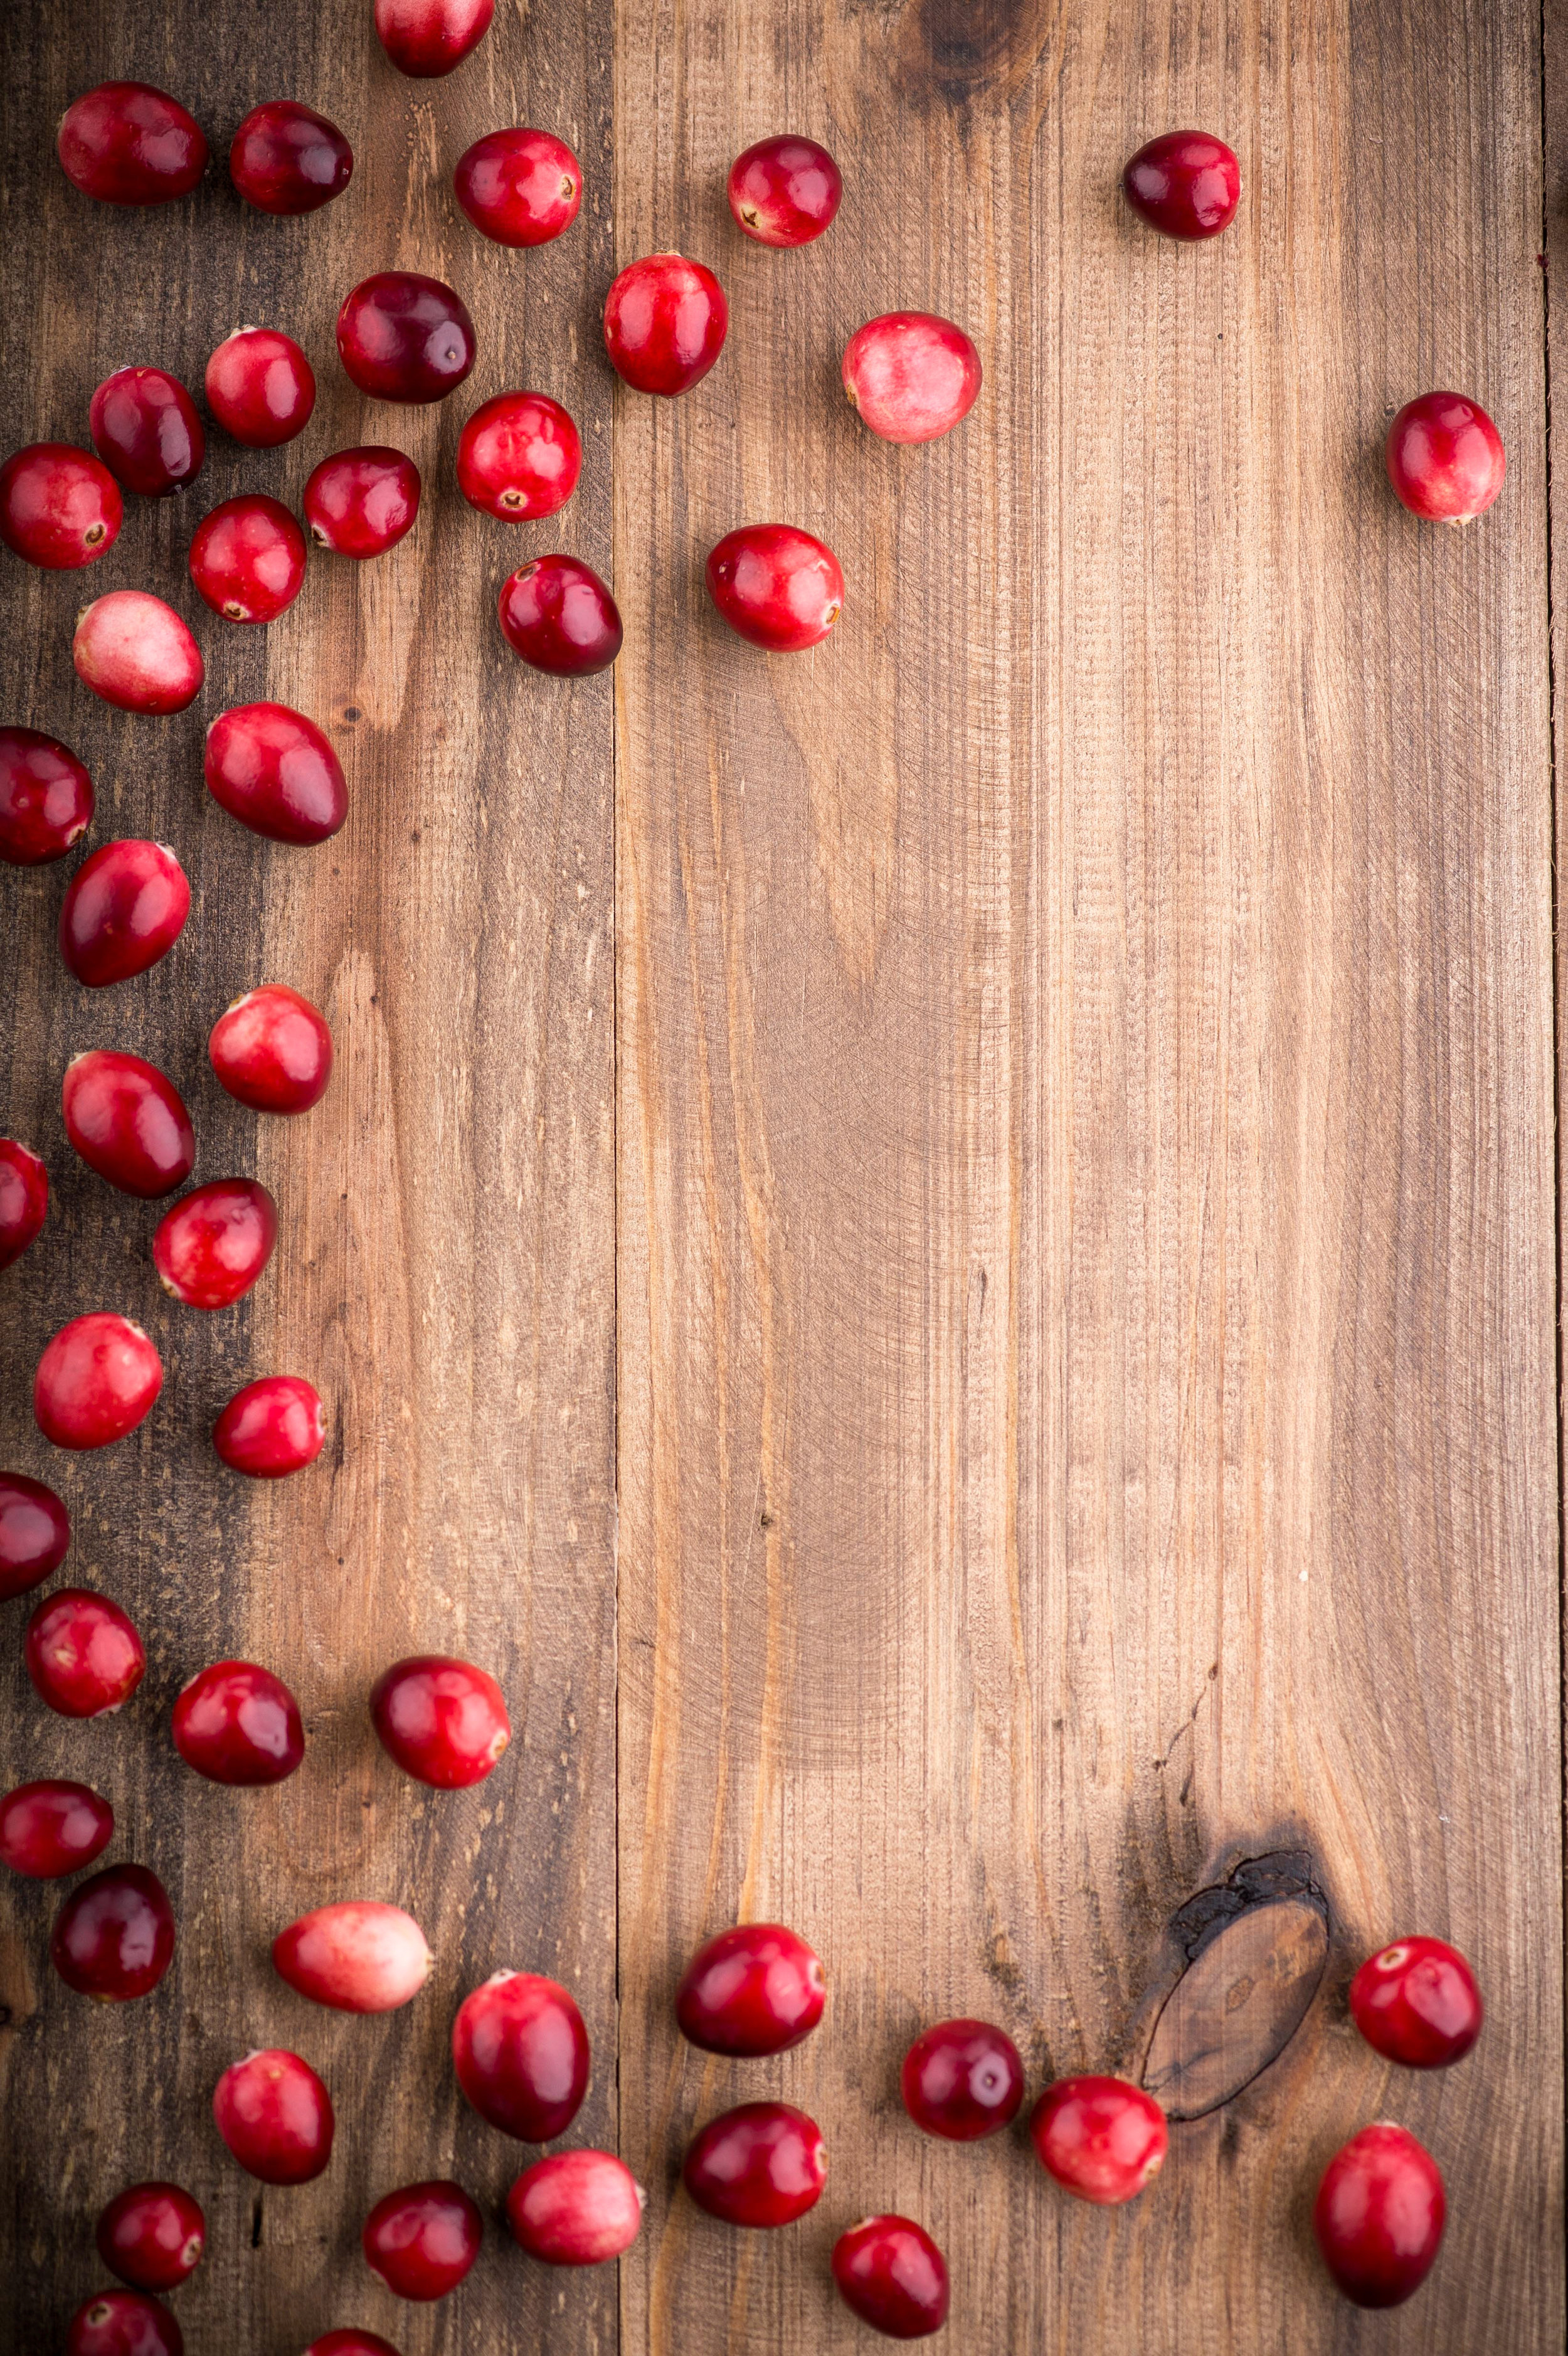 Corporate Imagery 89Brown wood with berries and blank space001*2-2.jpg